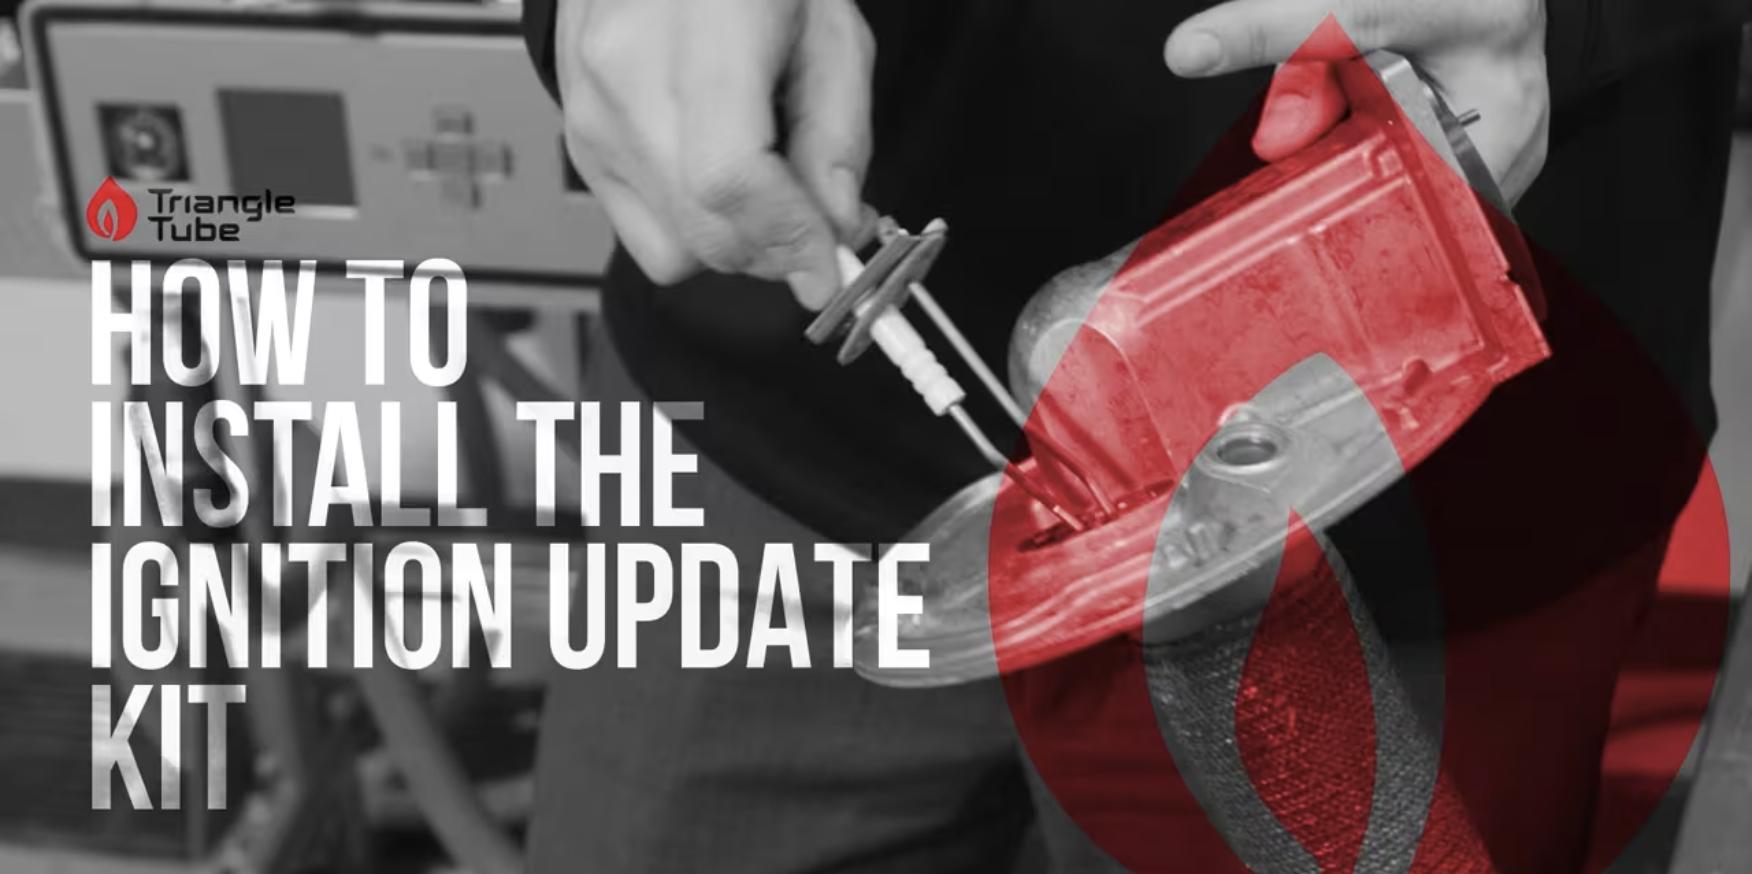 How To: Install The Ignition Update Kit - Prestige Boiler